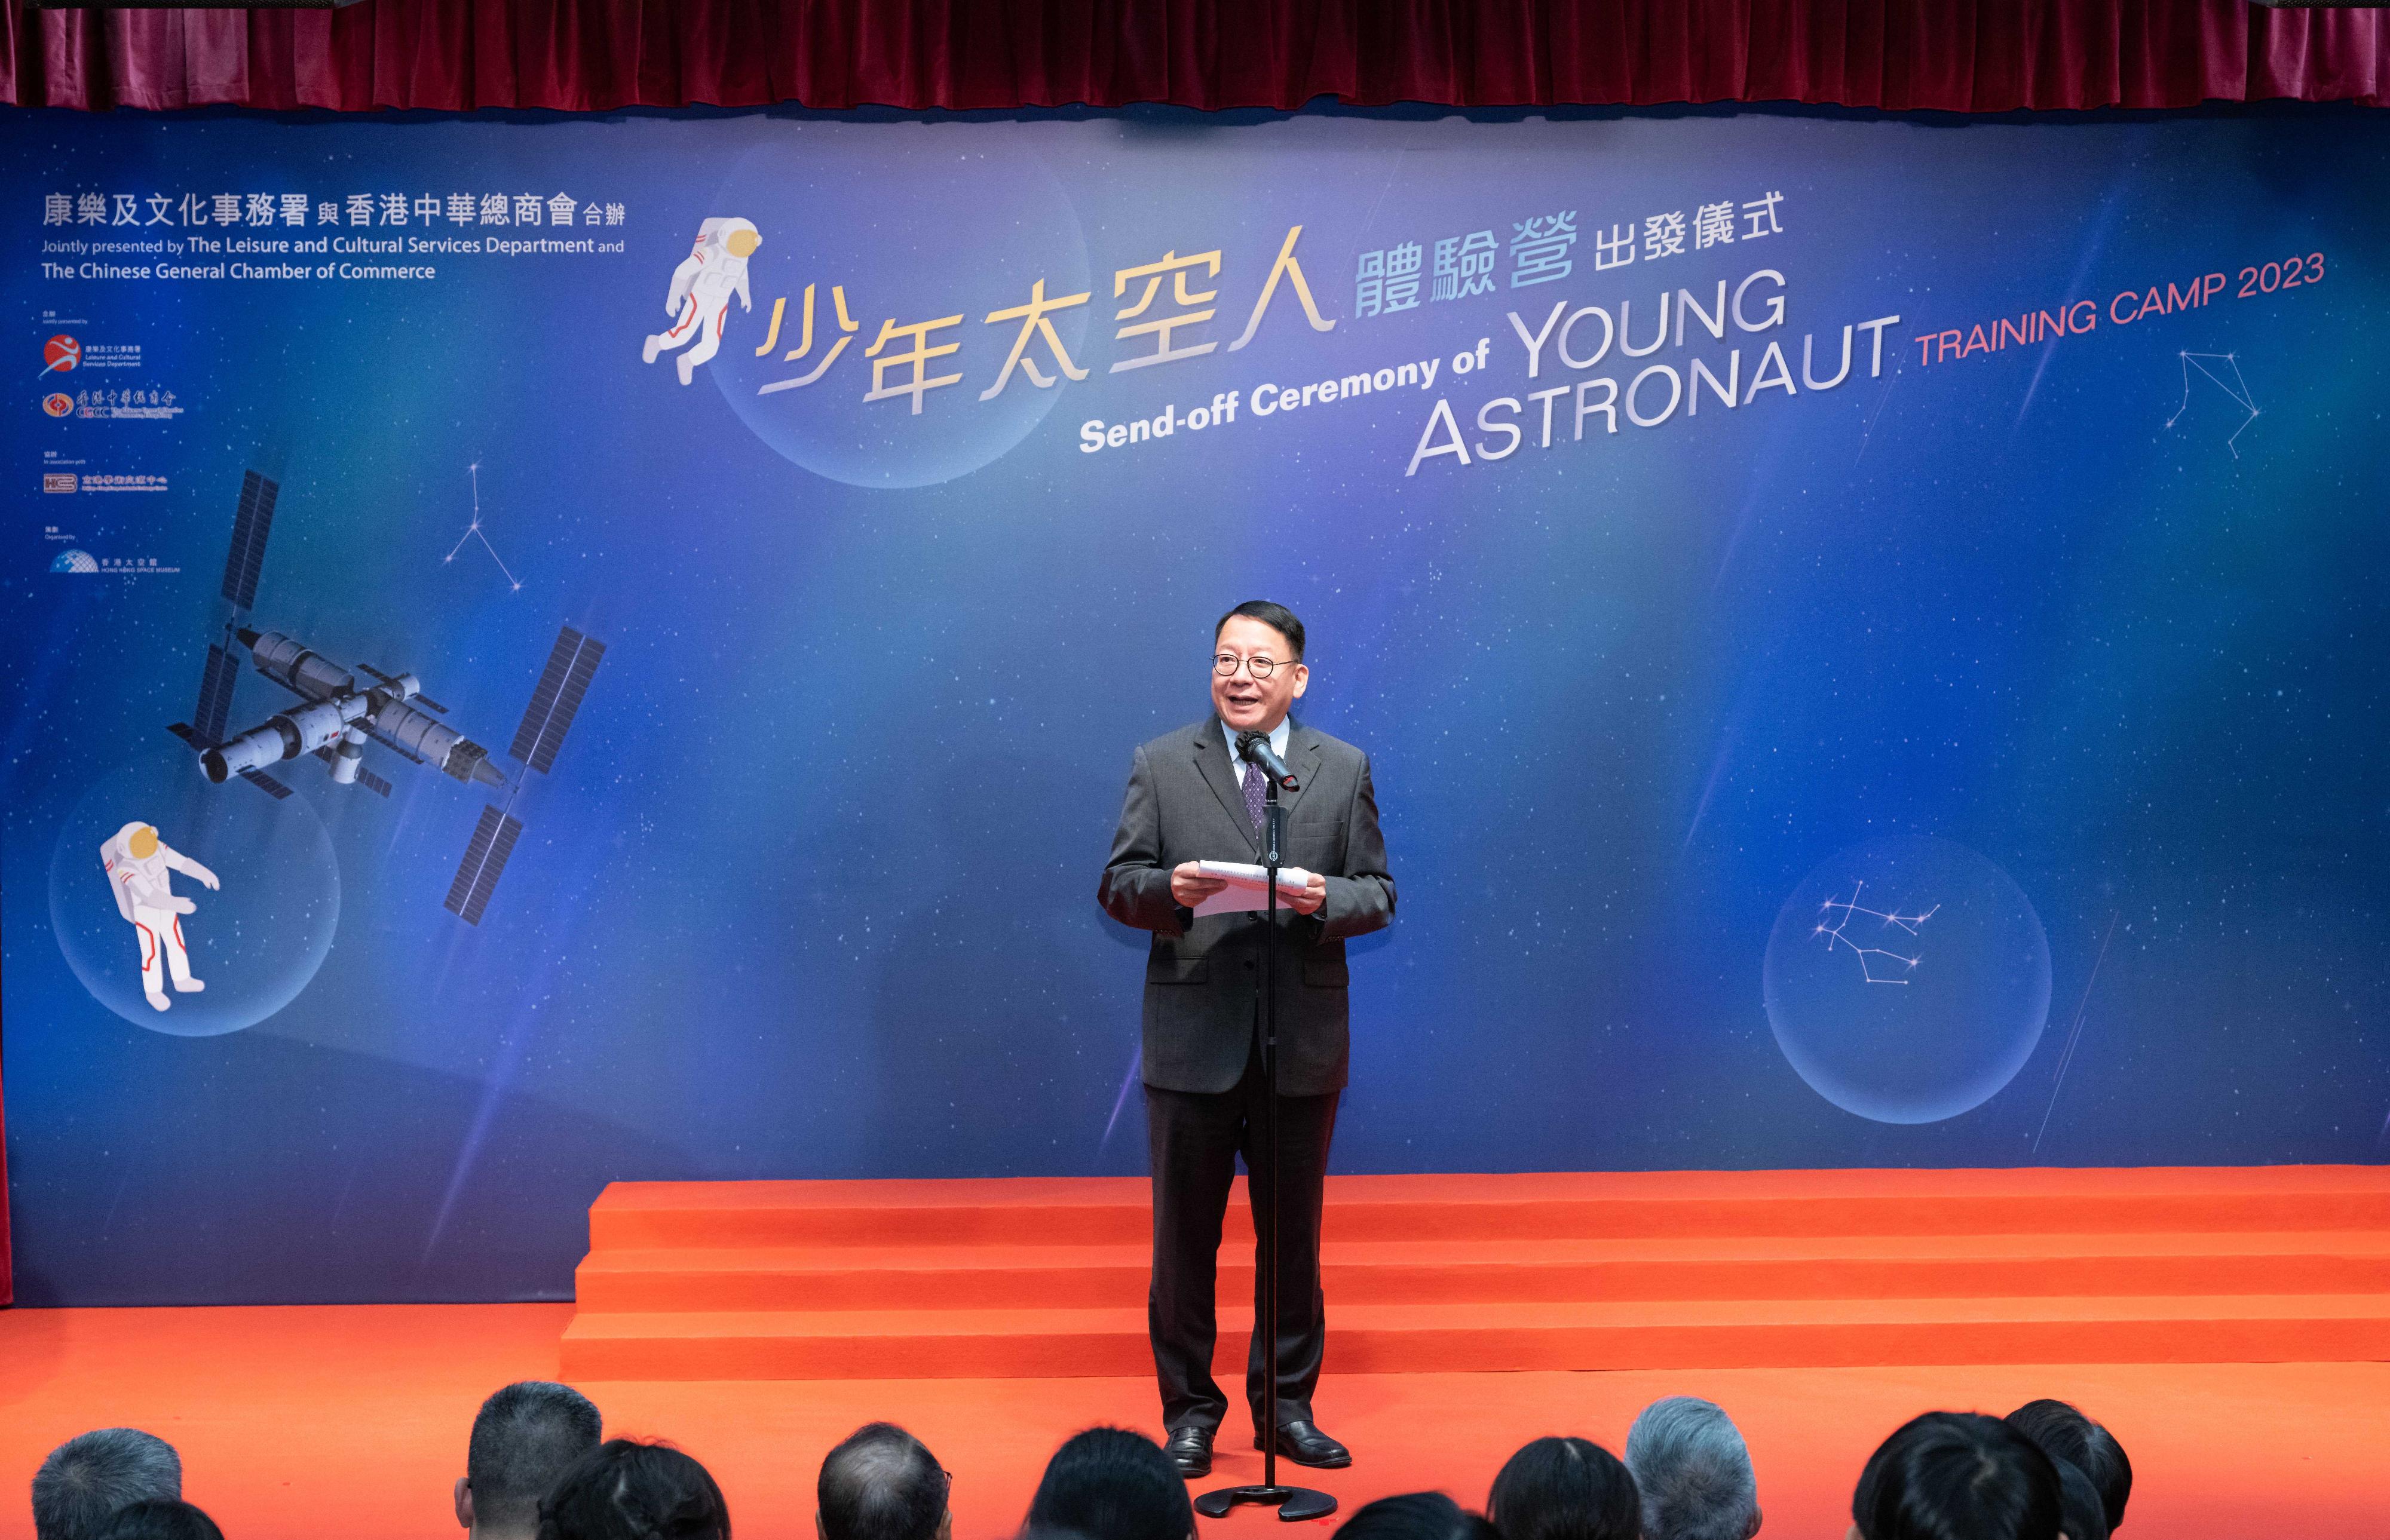 A send-off ceremony for the Young Astronaut Training Camp 2023 was held at the Hong Kong Space Museum today (July 25). Photo shows the Chief Secretary for Administration, Mr Chan Kwok-ki, addressing the send-off ceremony.